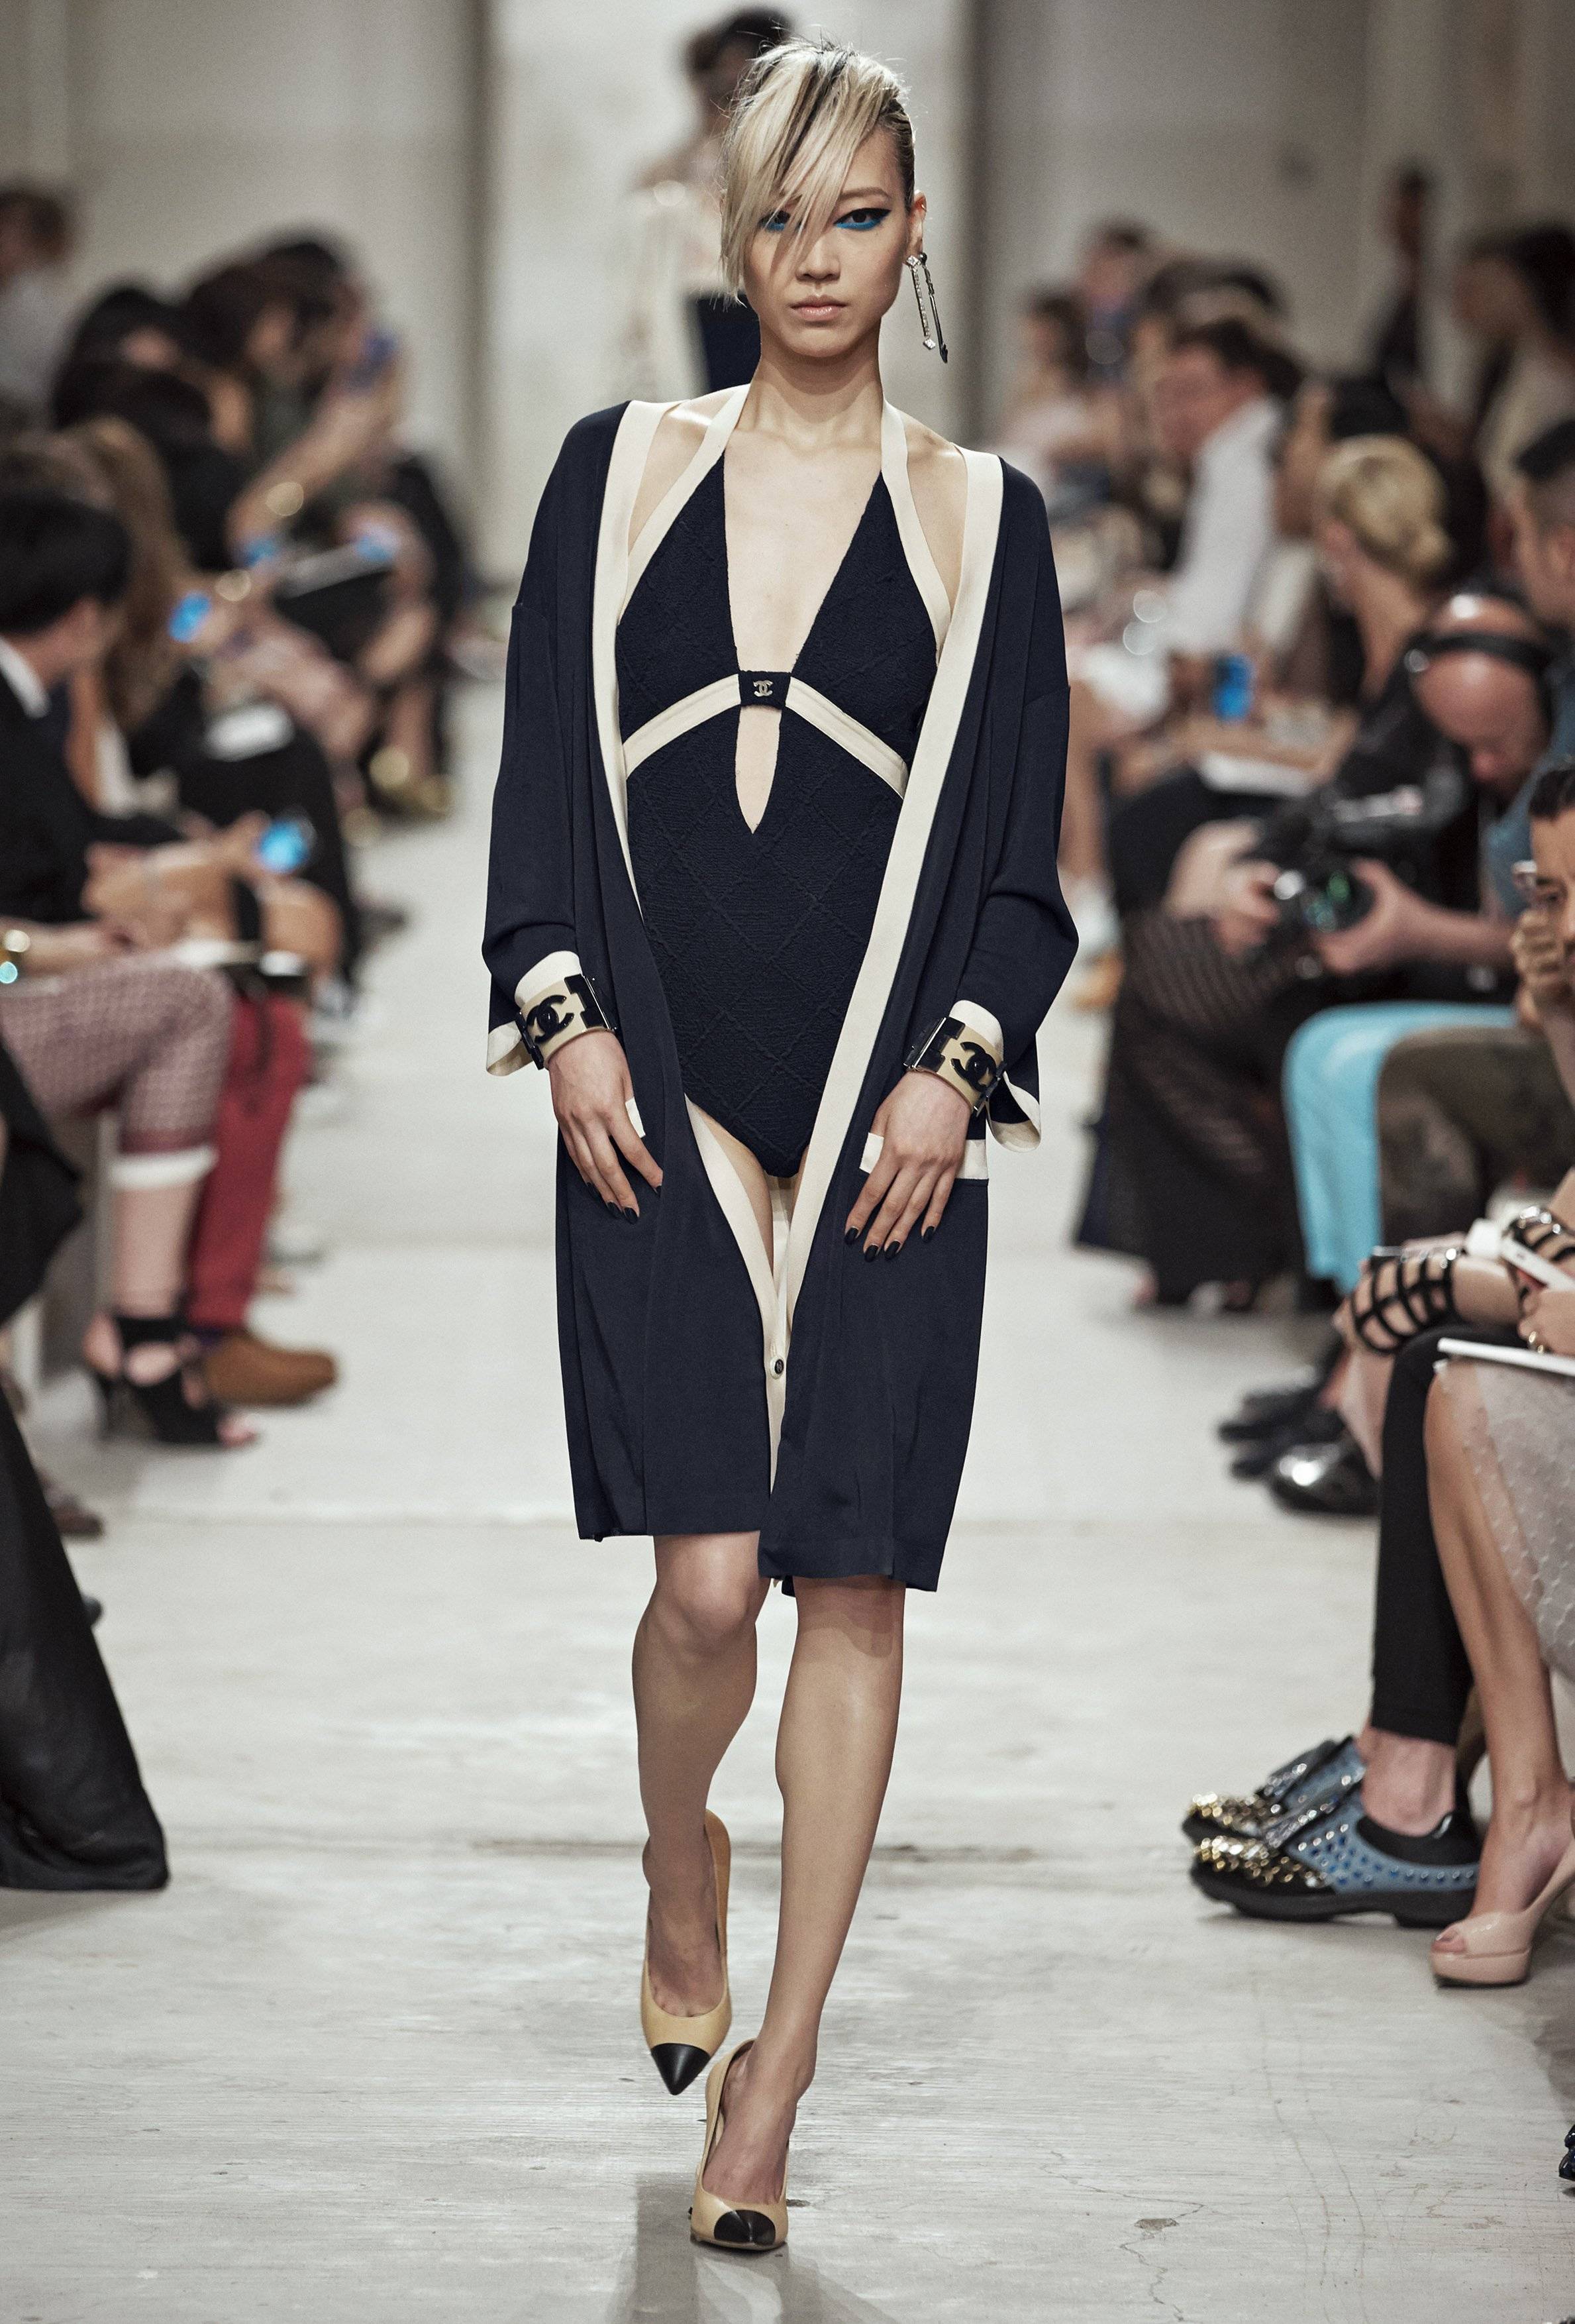 CHANEL's 2013/2014 Cruise Collection - Haute Living